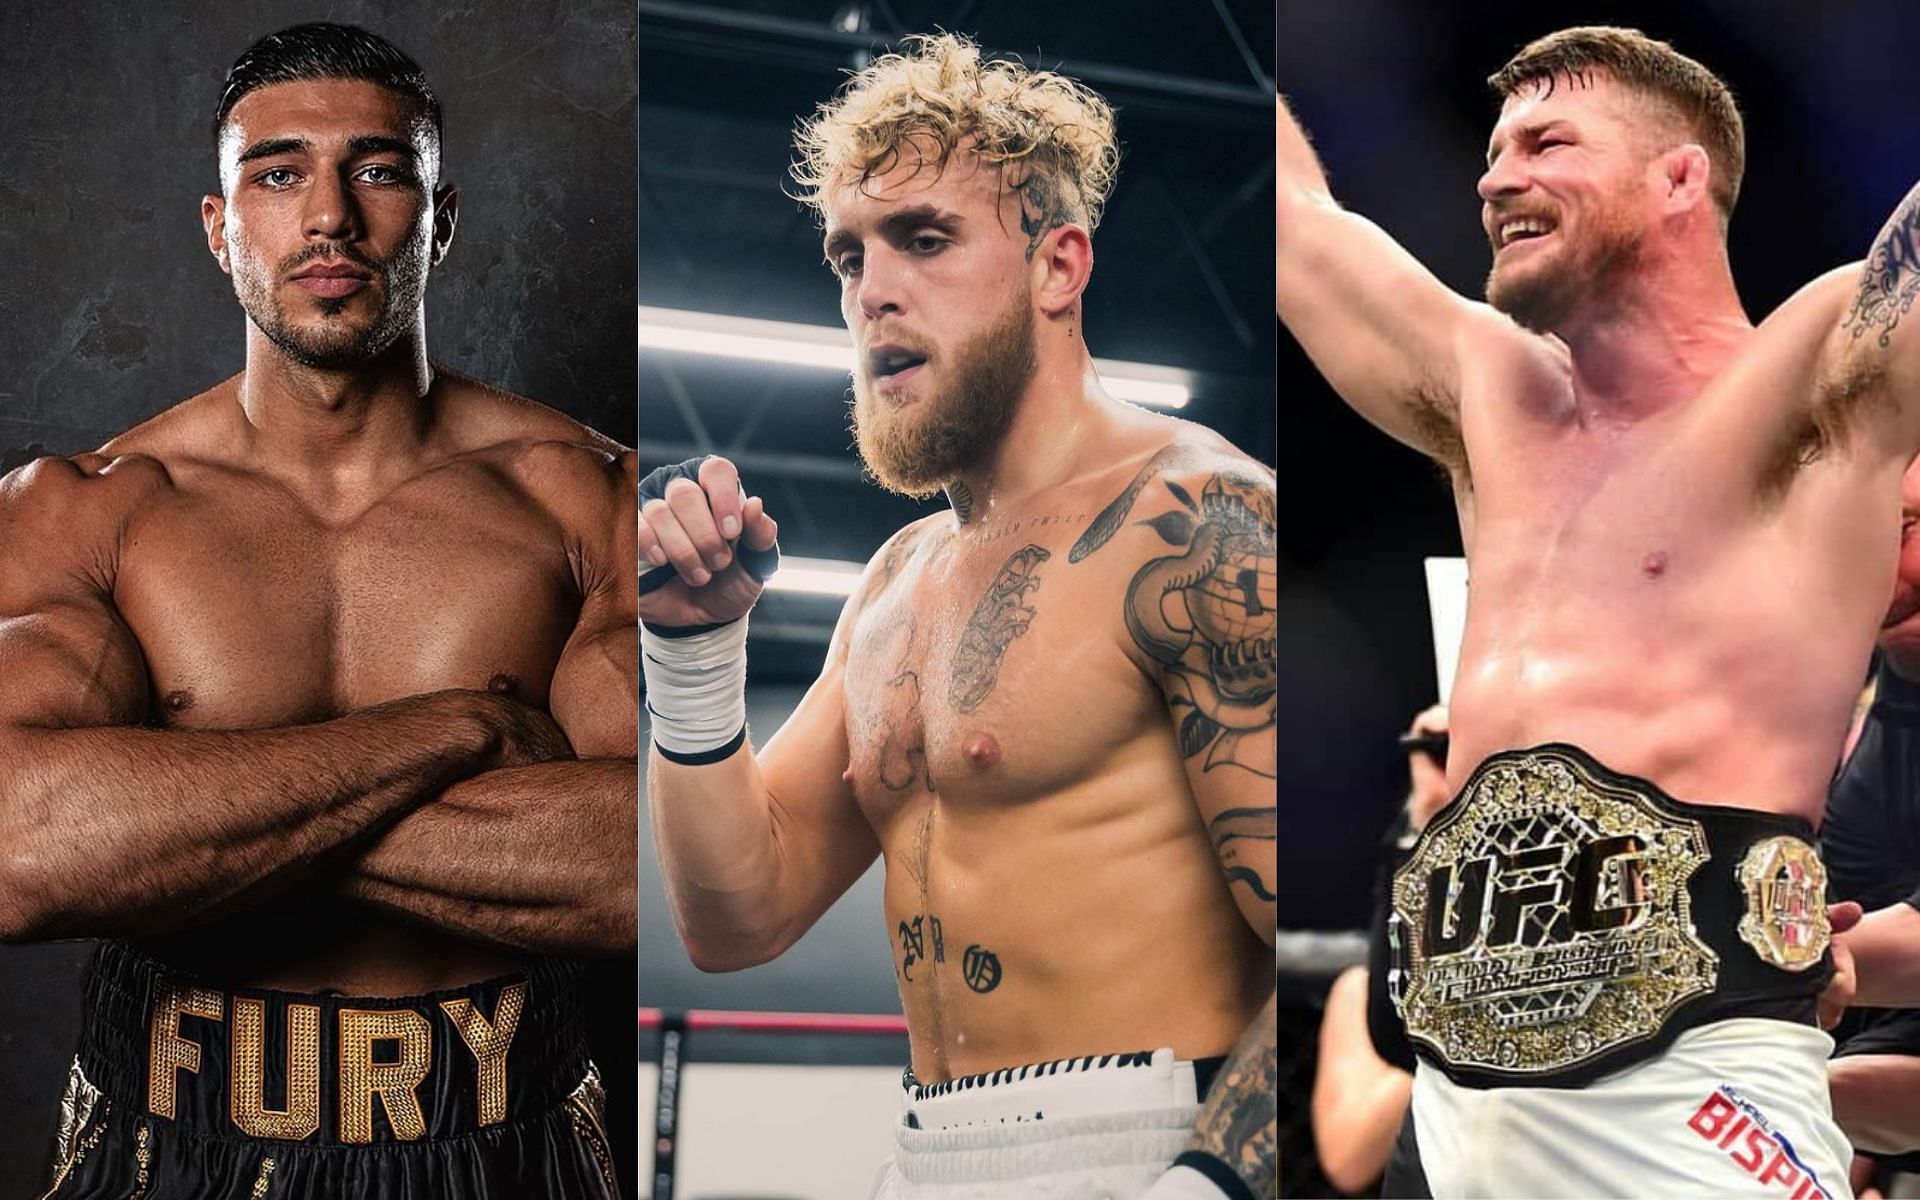 Tommy Fury (left) Jake Paul (middle) Michael Bisping (right) [Image Credits: @jakepaul, @tommyfury on Instagram]